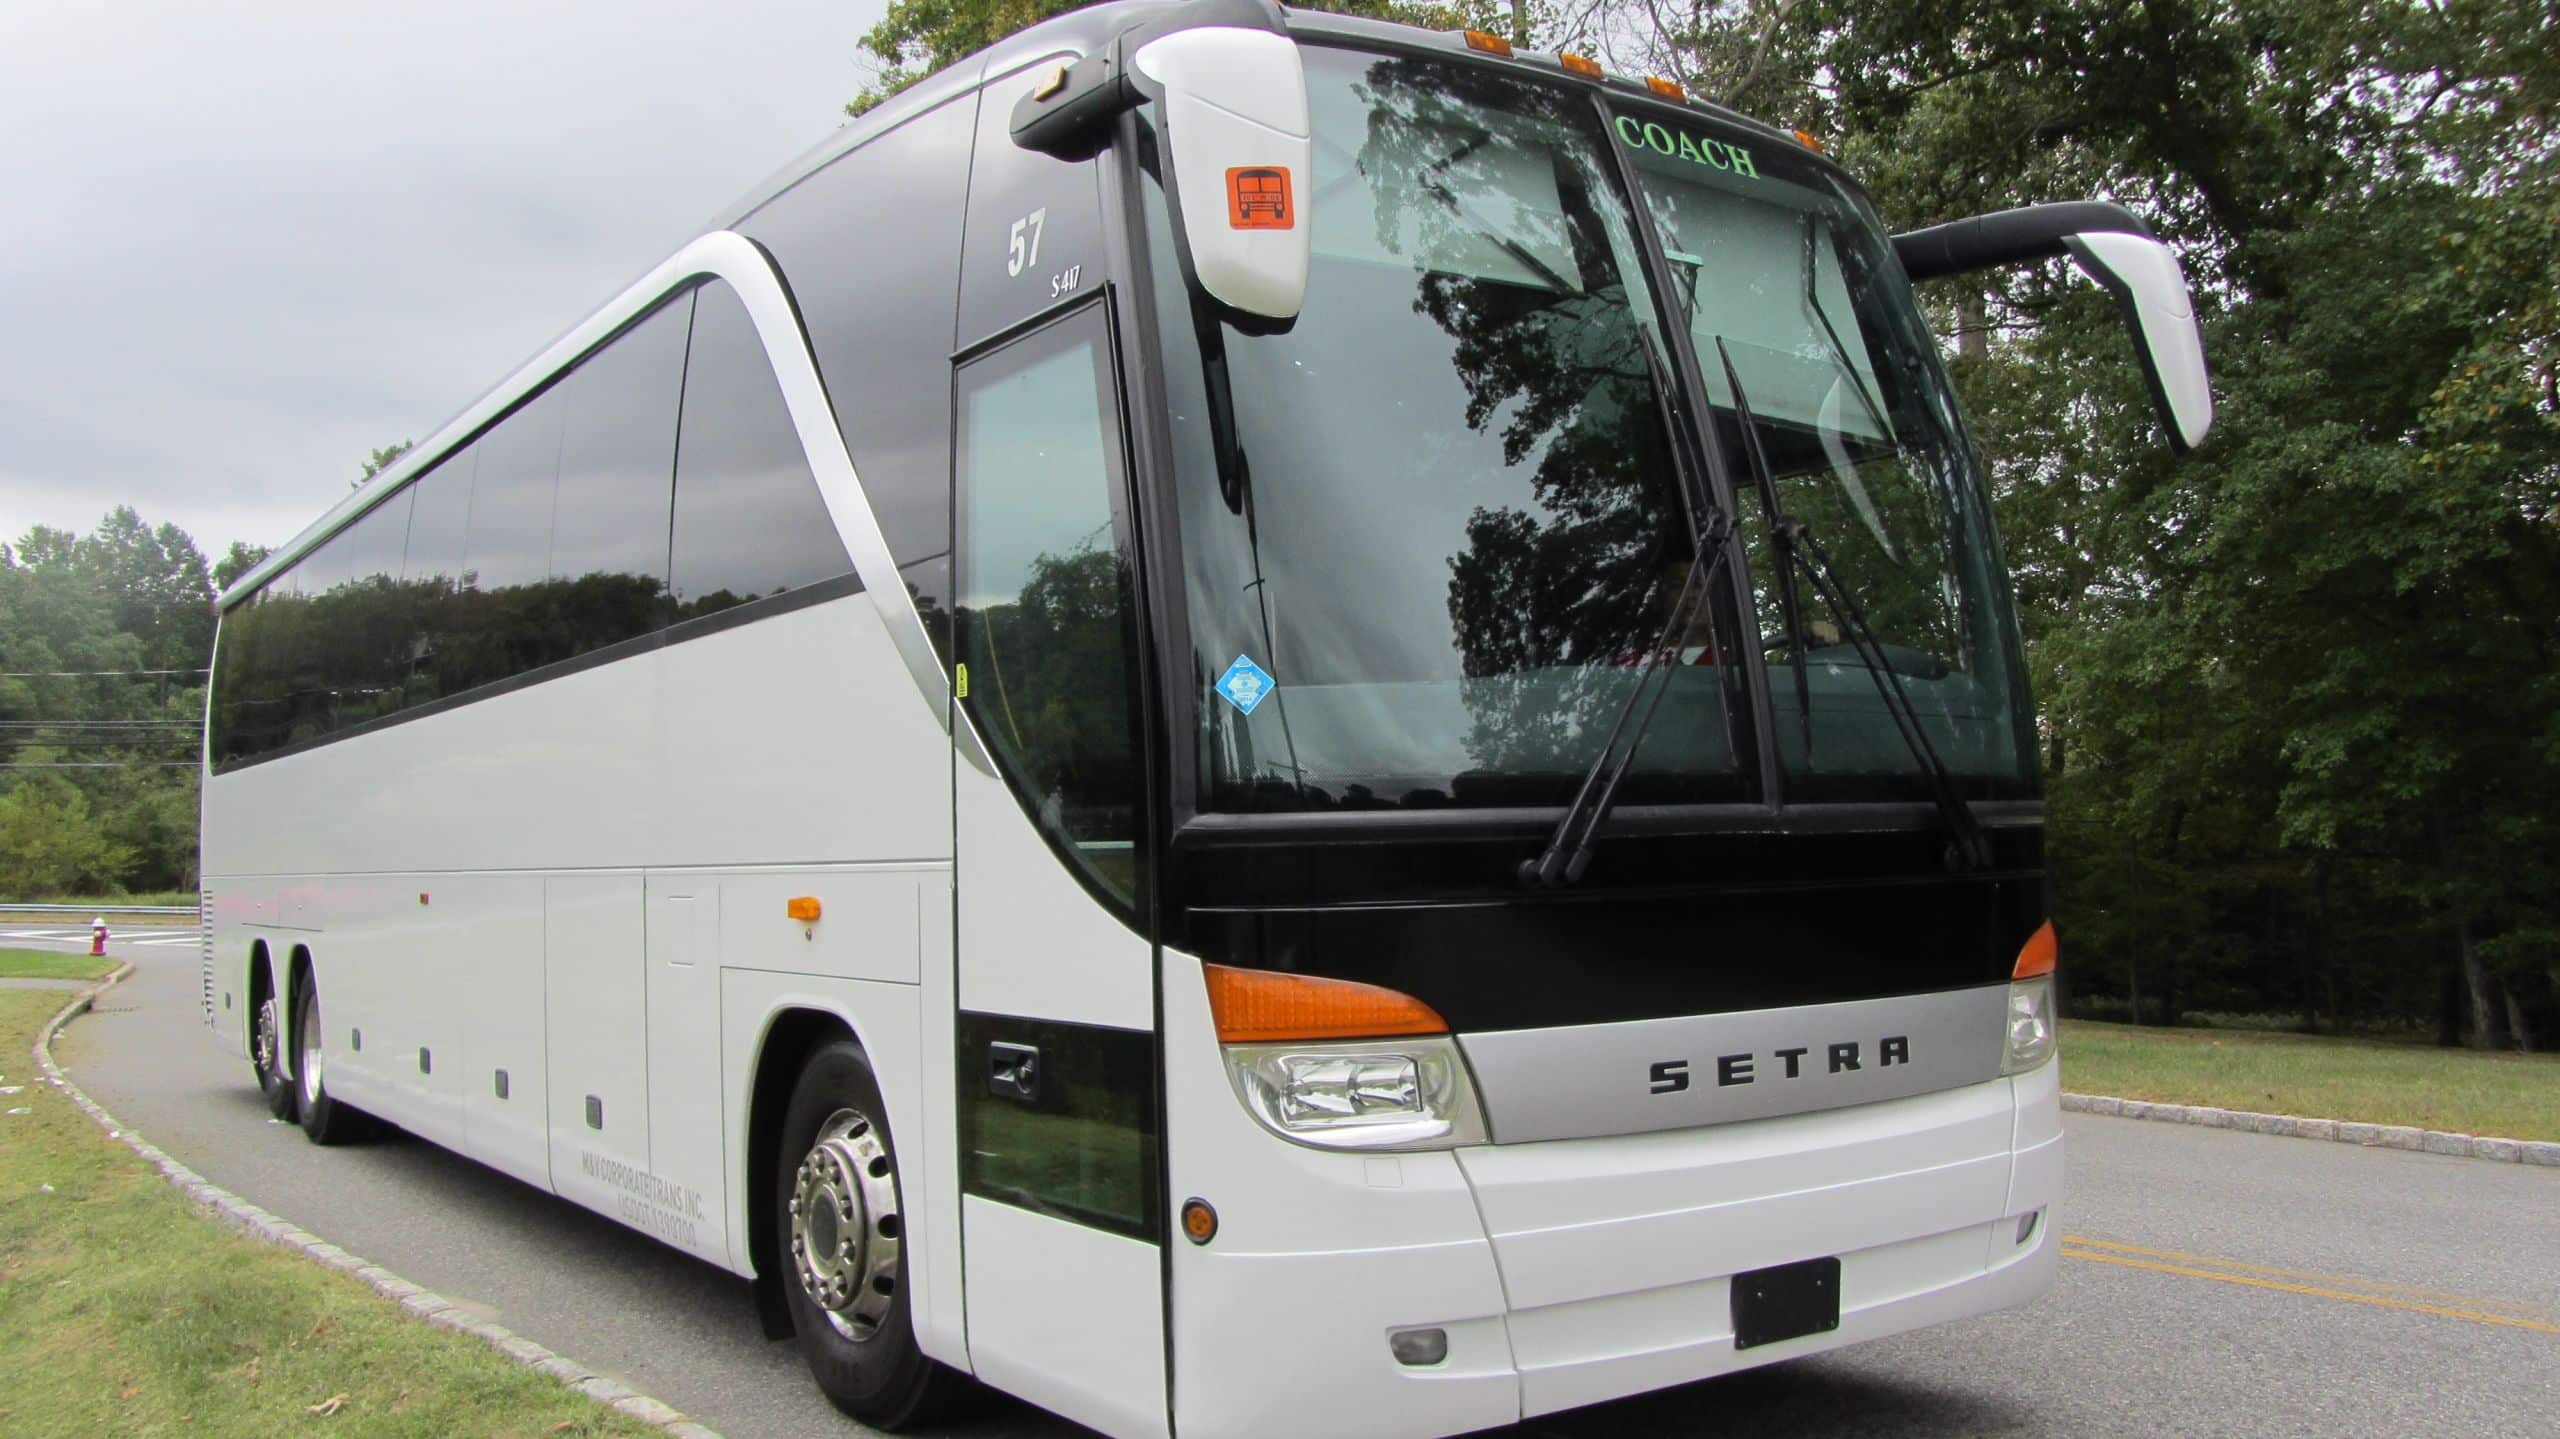 56 Passenger Serta White Bus for a Wedding in Long Island and New York